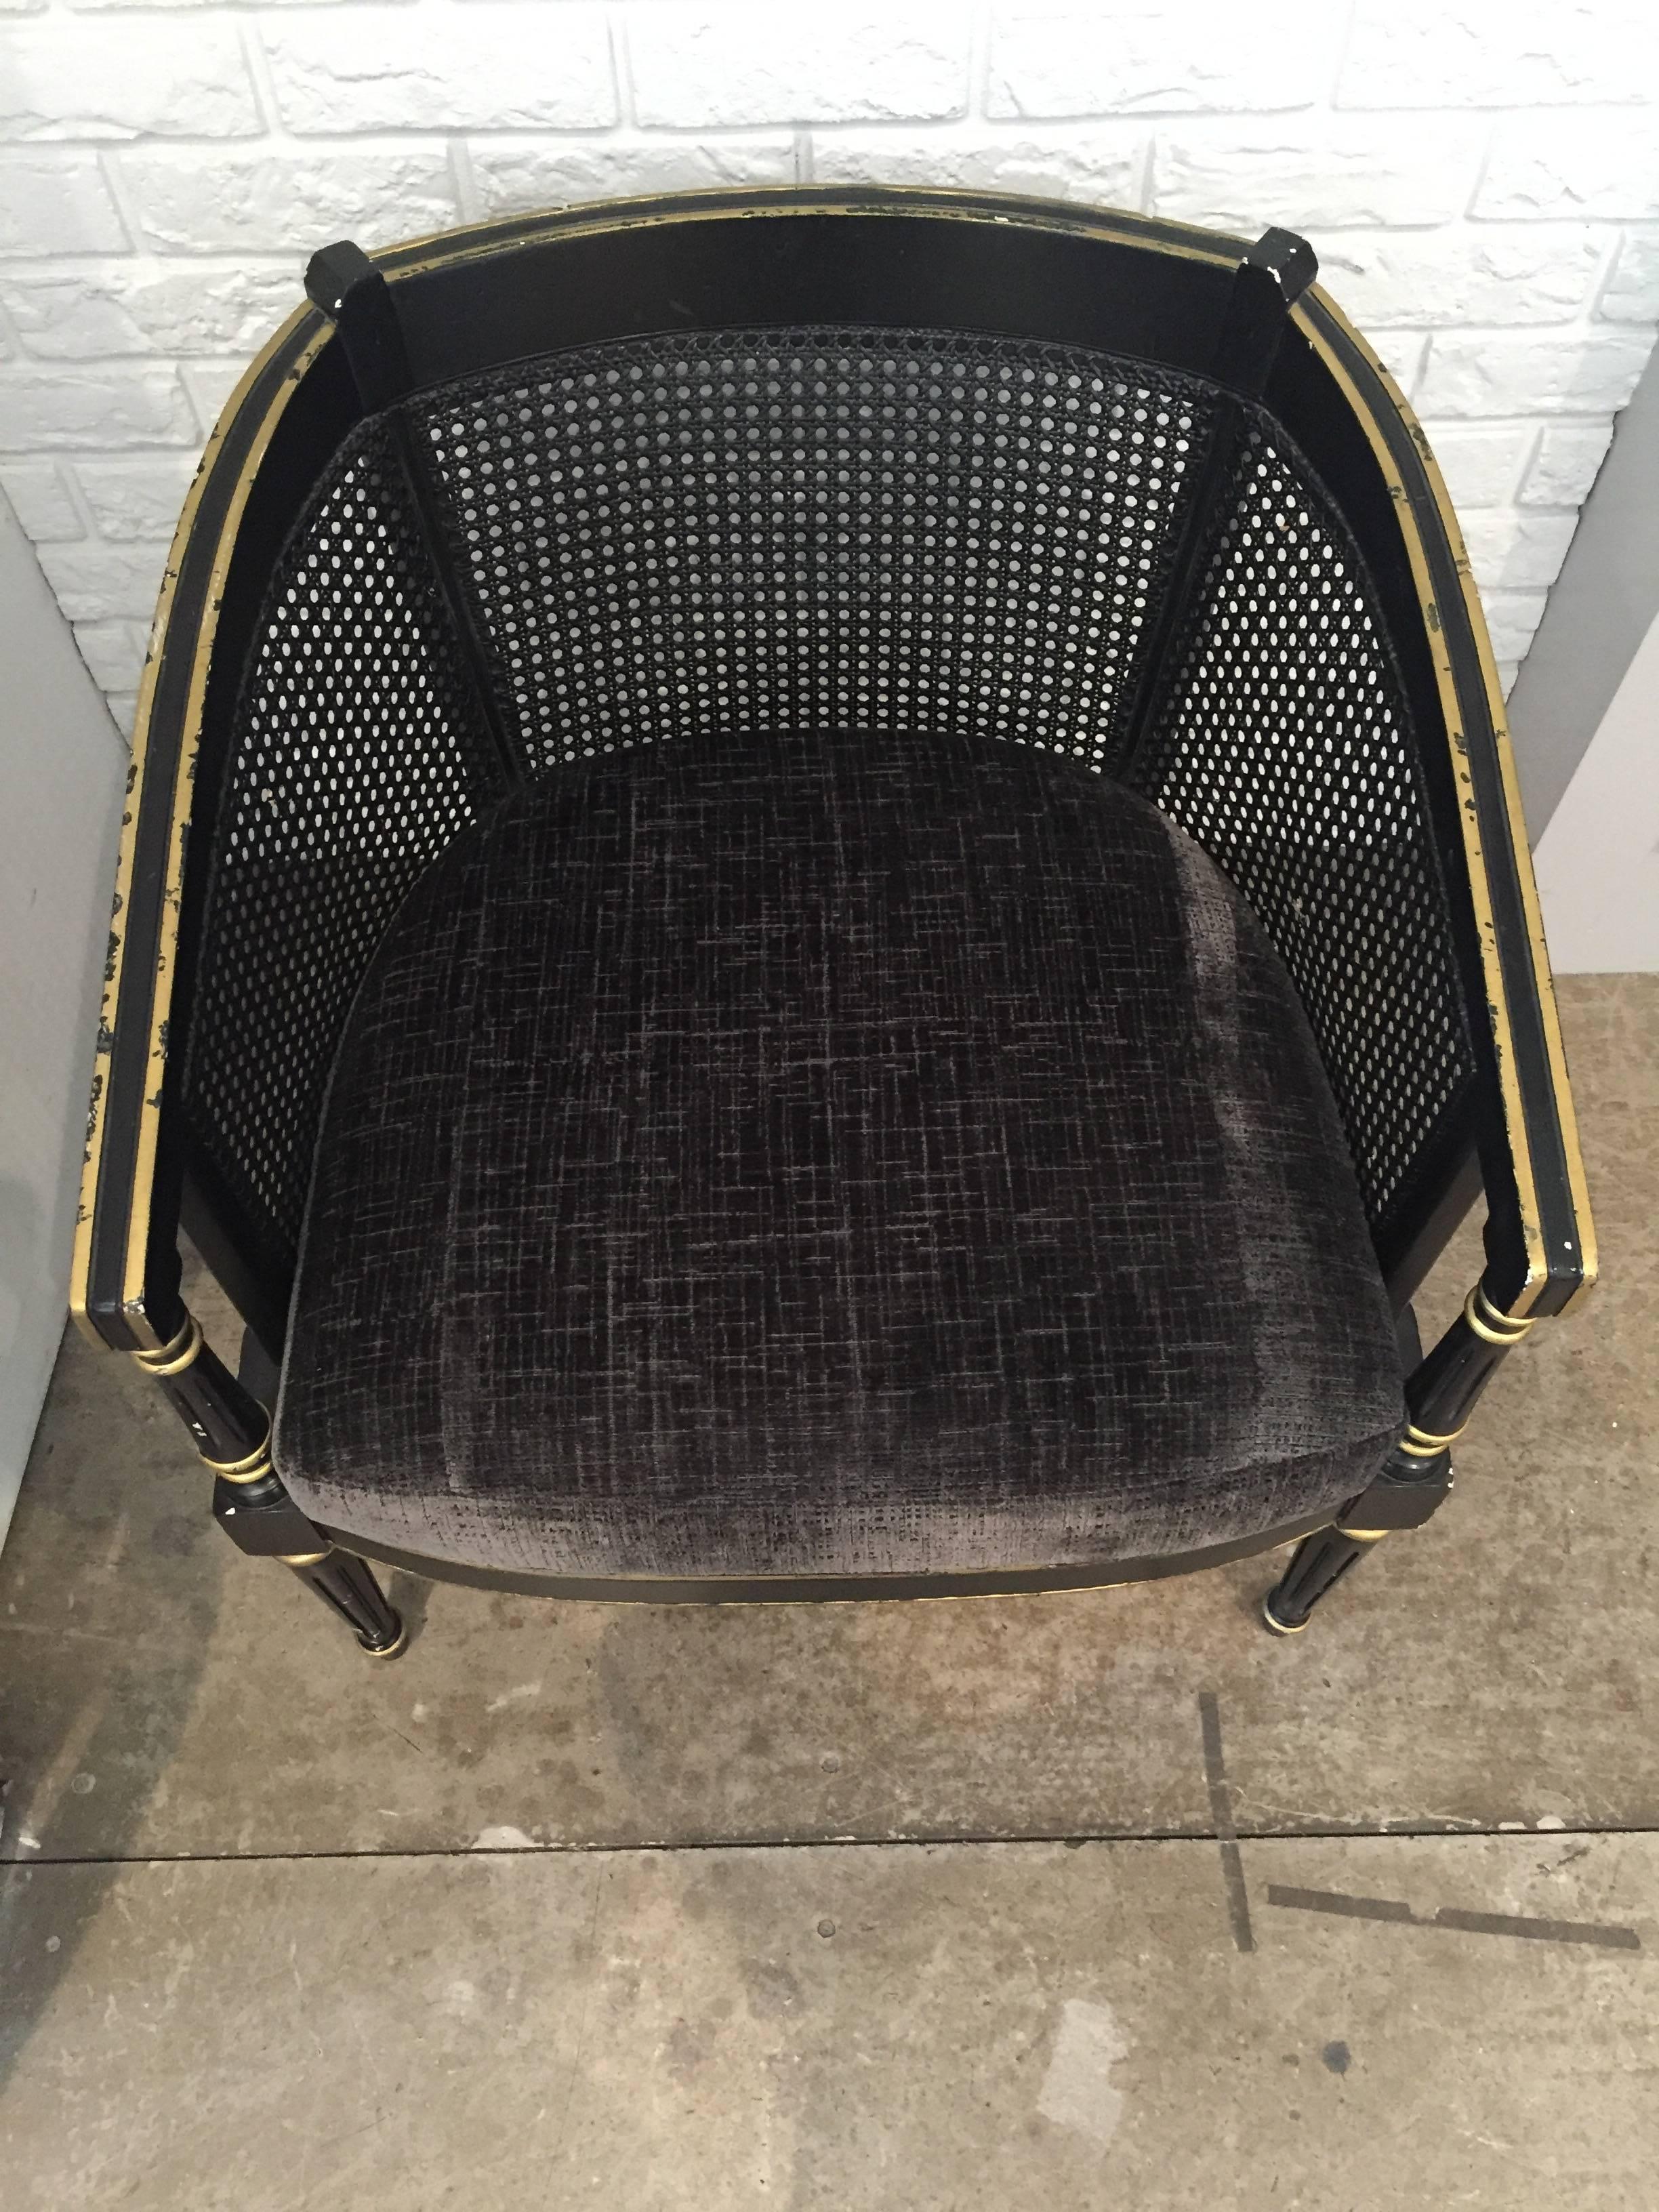 Hollywood Regency Pair of 20th Century Empire-Style Chairs